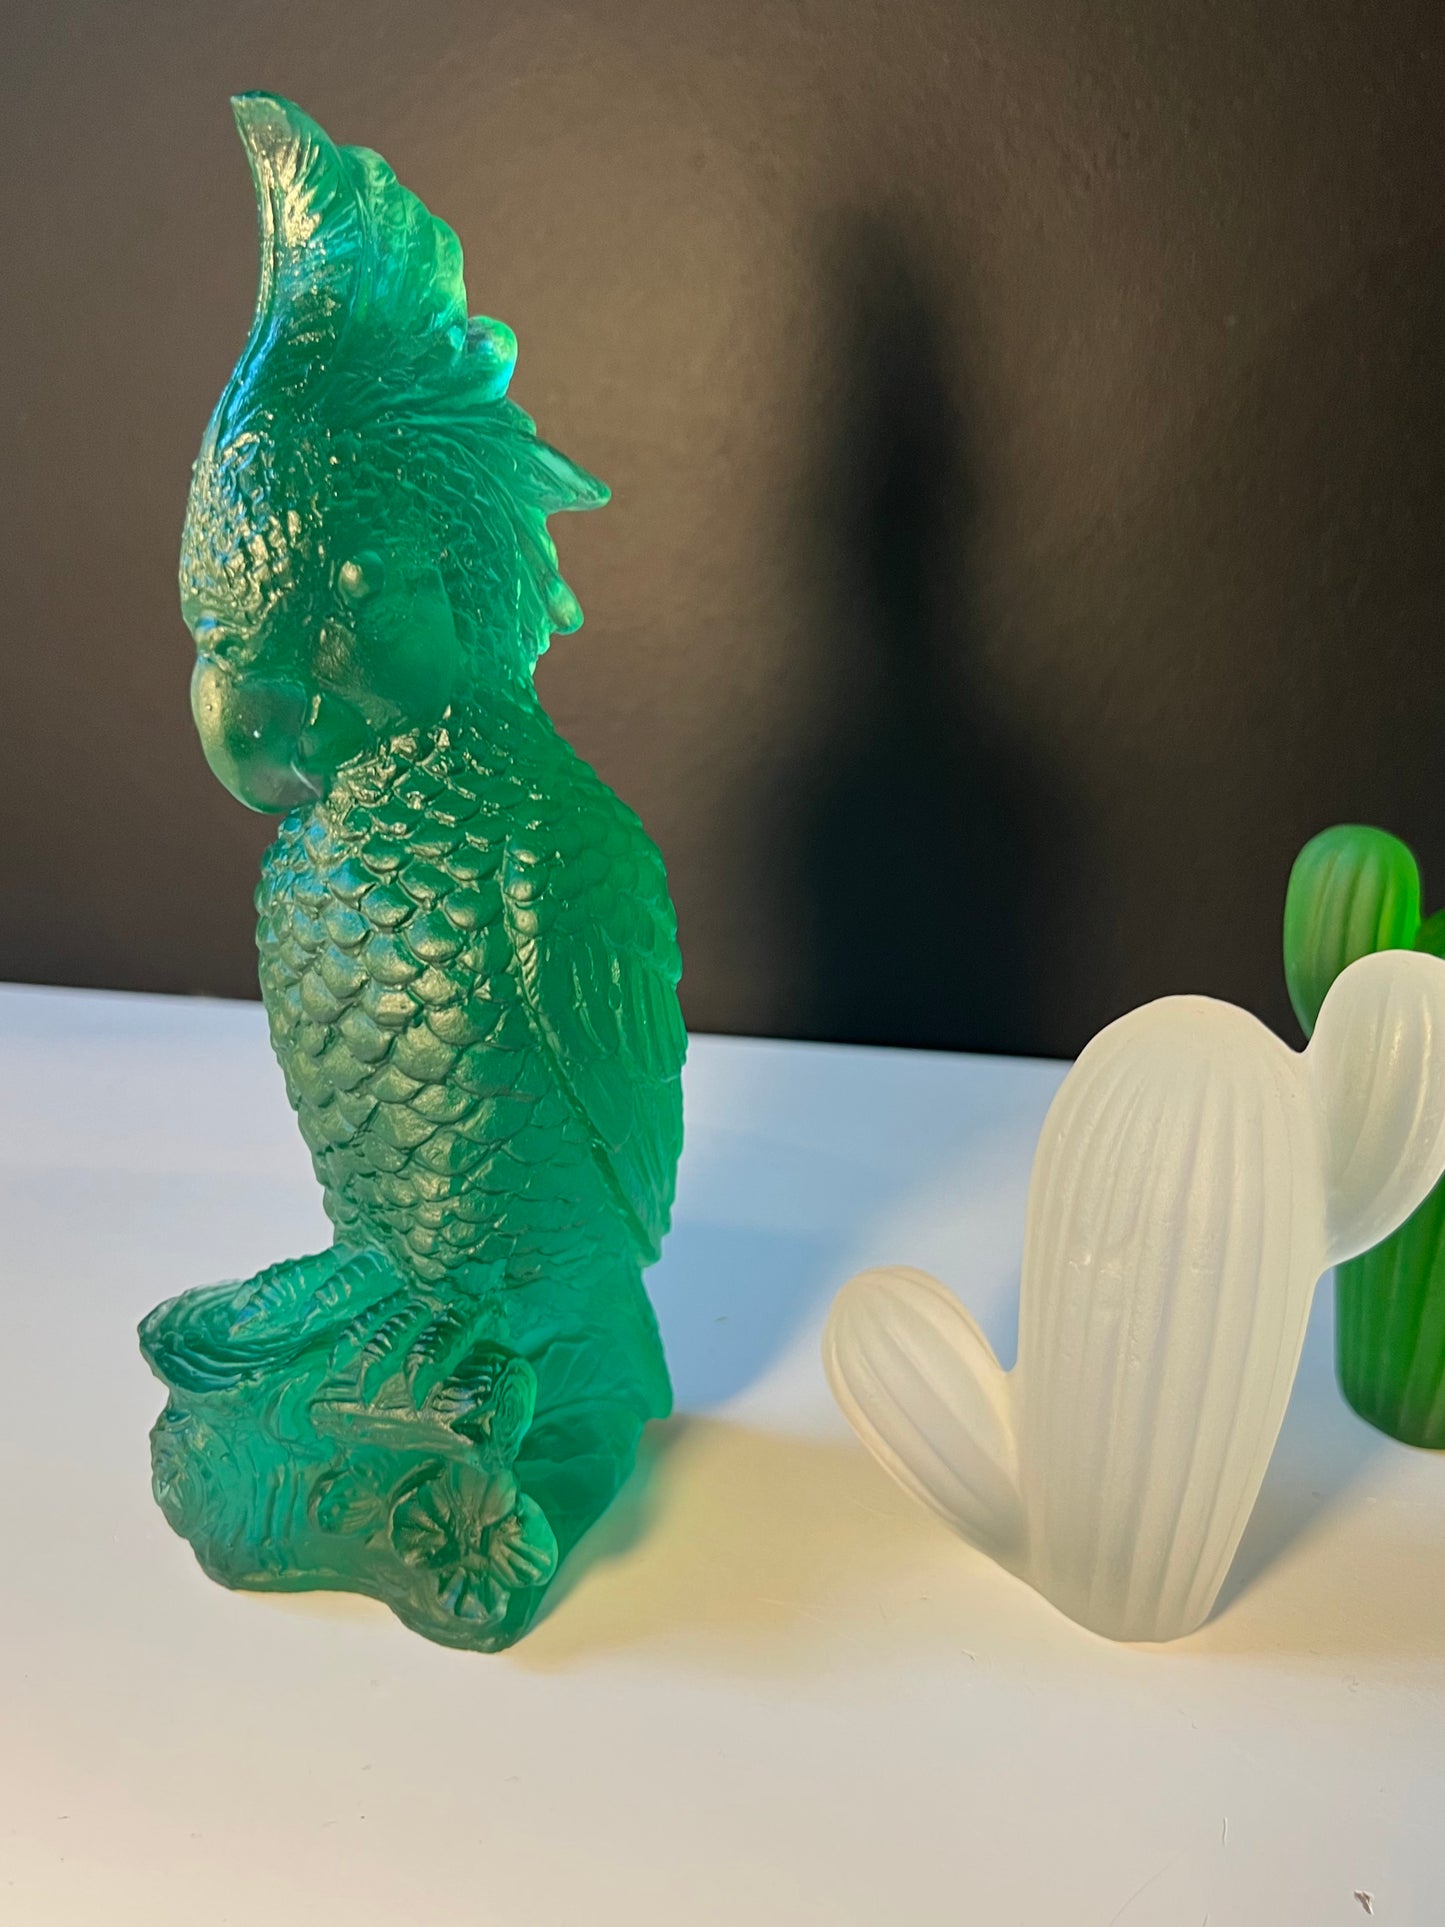 Rio Parrot Cast Glass Sculpture Emerald green next to ice glass cactus